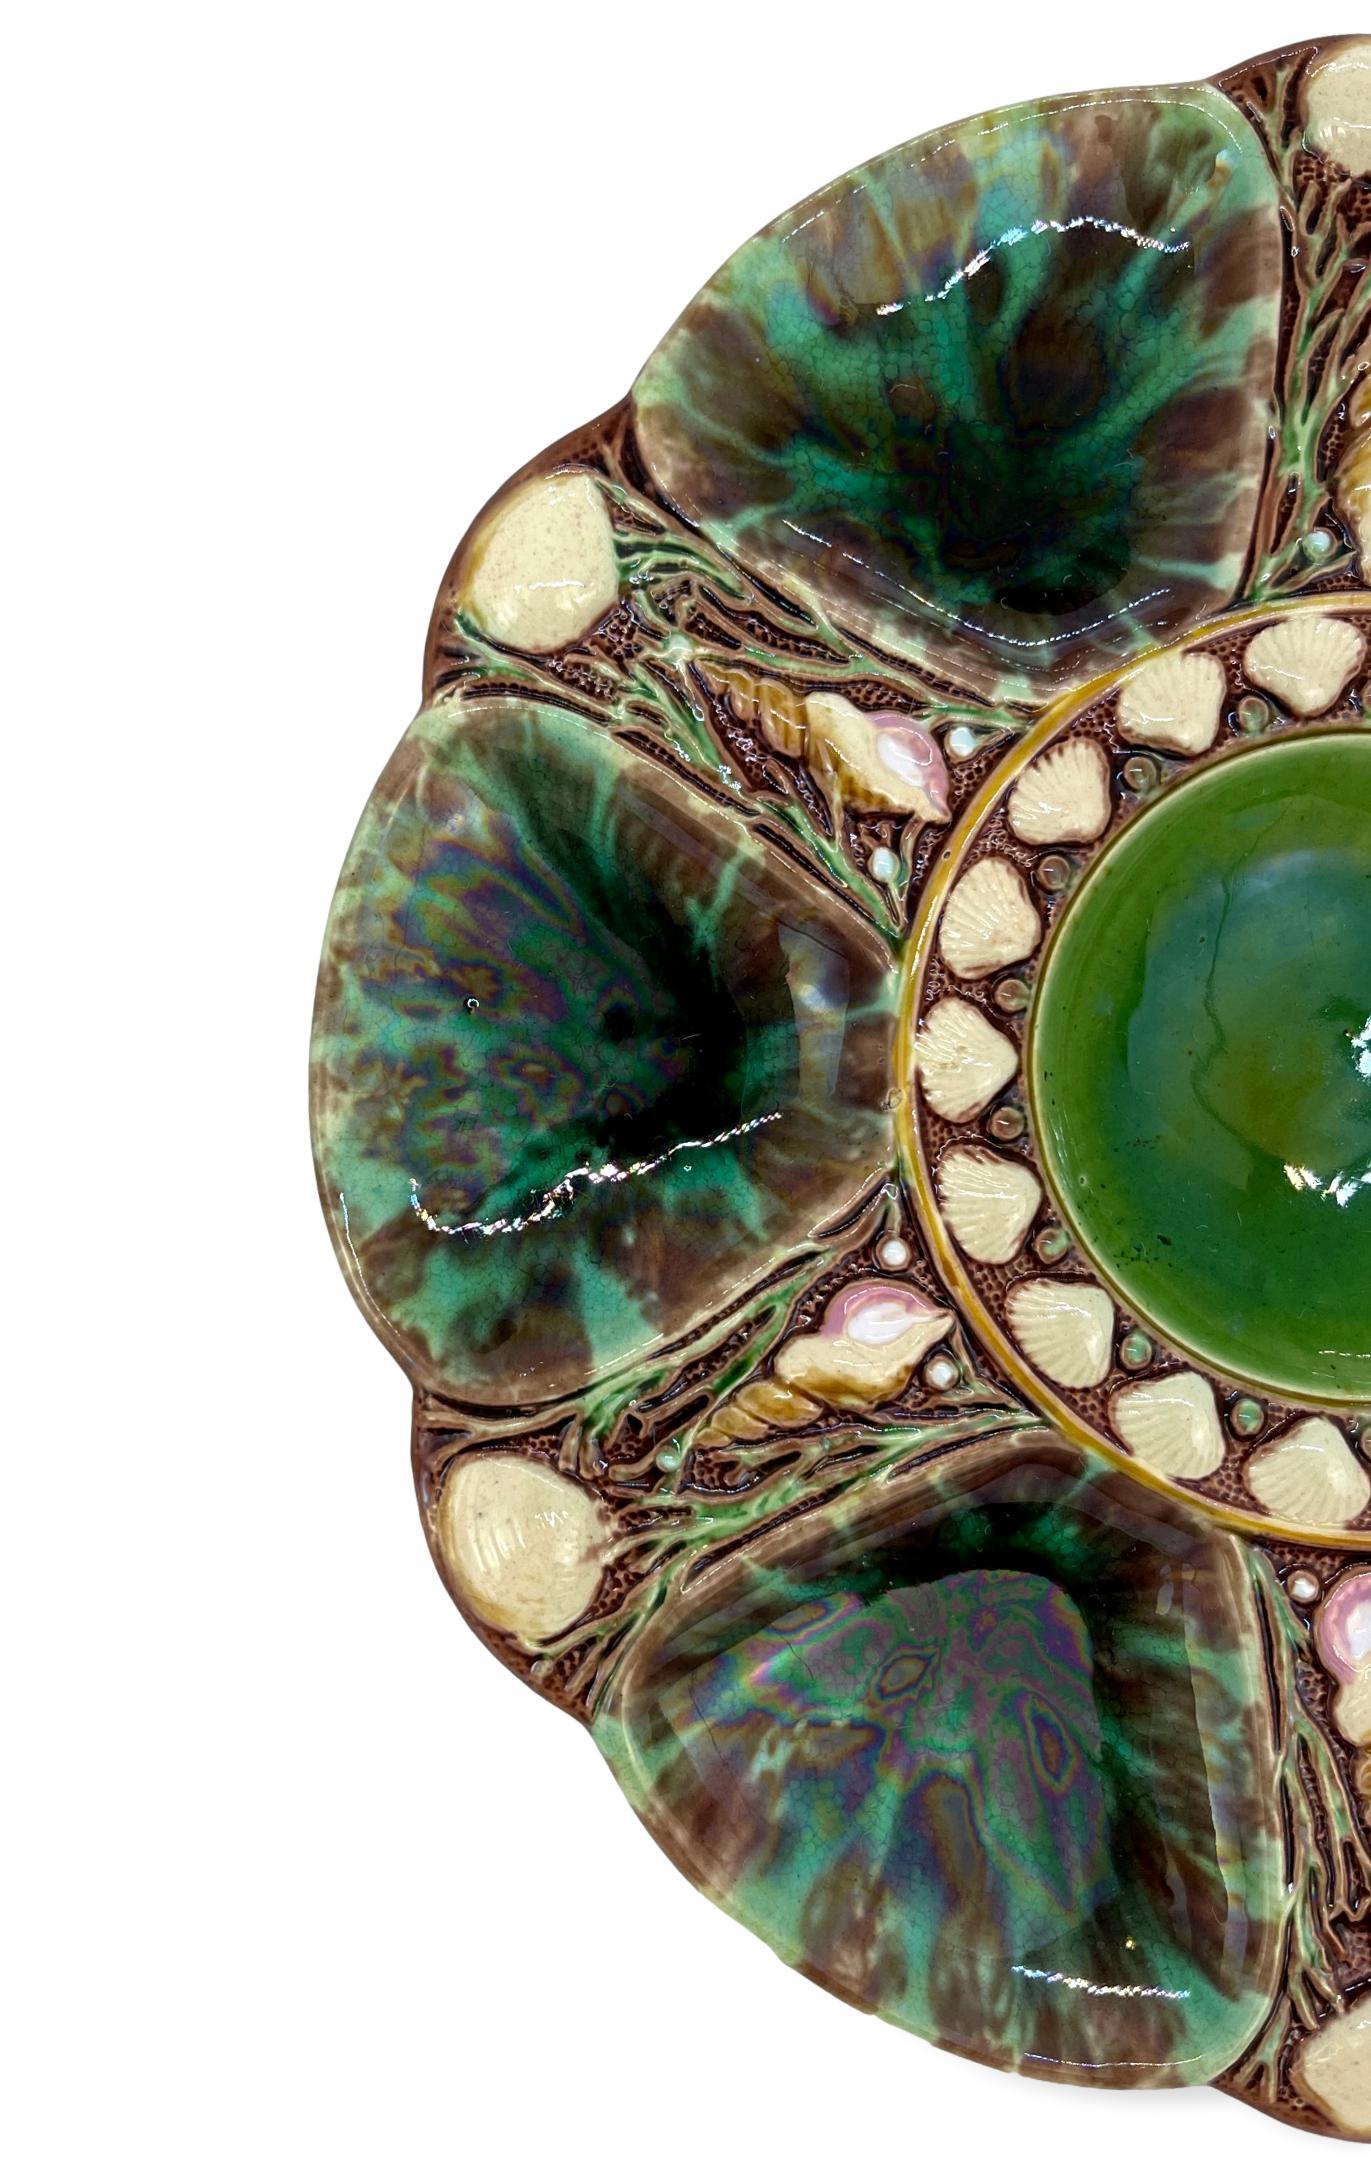 Minton Majolica six-well oyster plate, glazed in mottled greens and browns, the reverse impressed, 'Minton,' and date cypher for 1871, molded British Registry Lozenge for 20 March 1867 (when the design was registered), and impressed design number